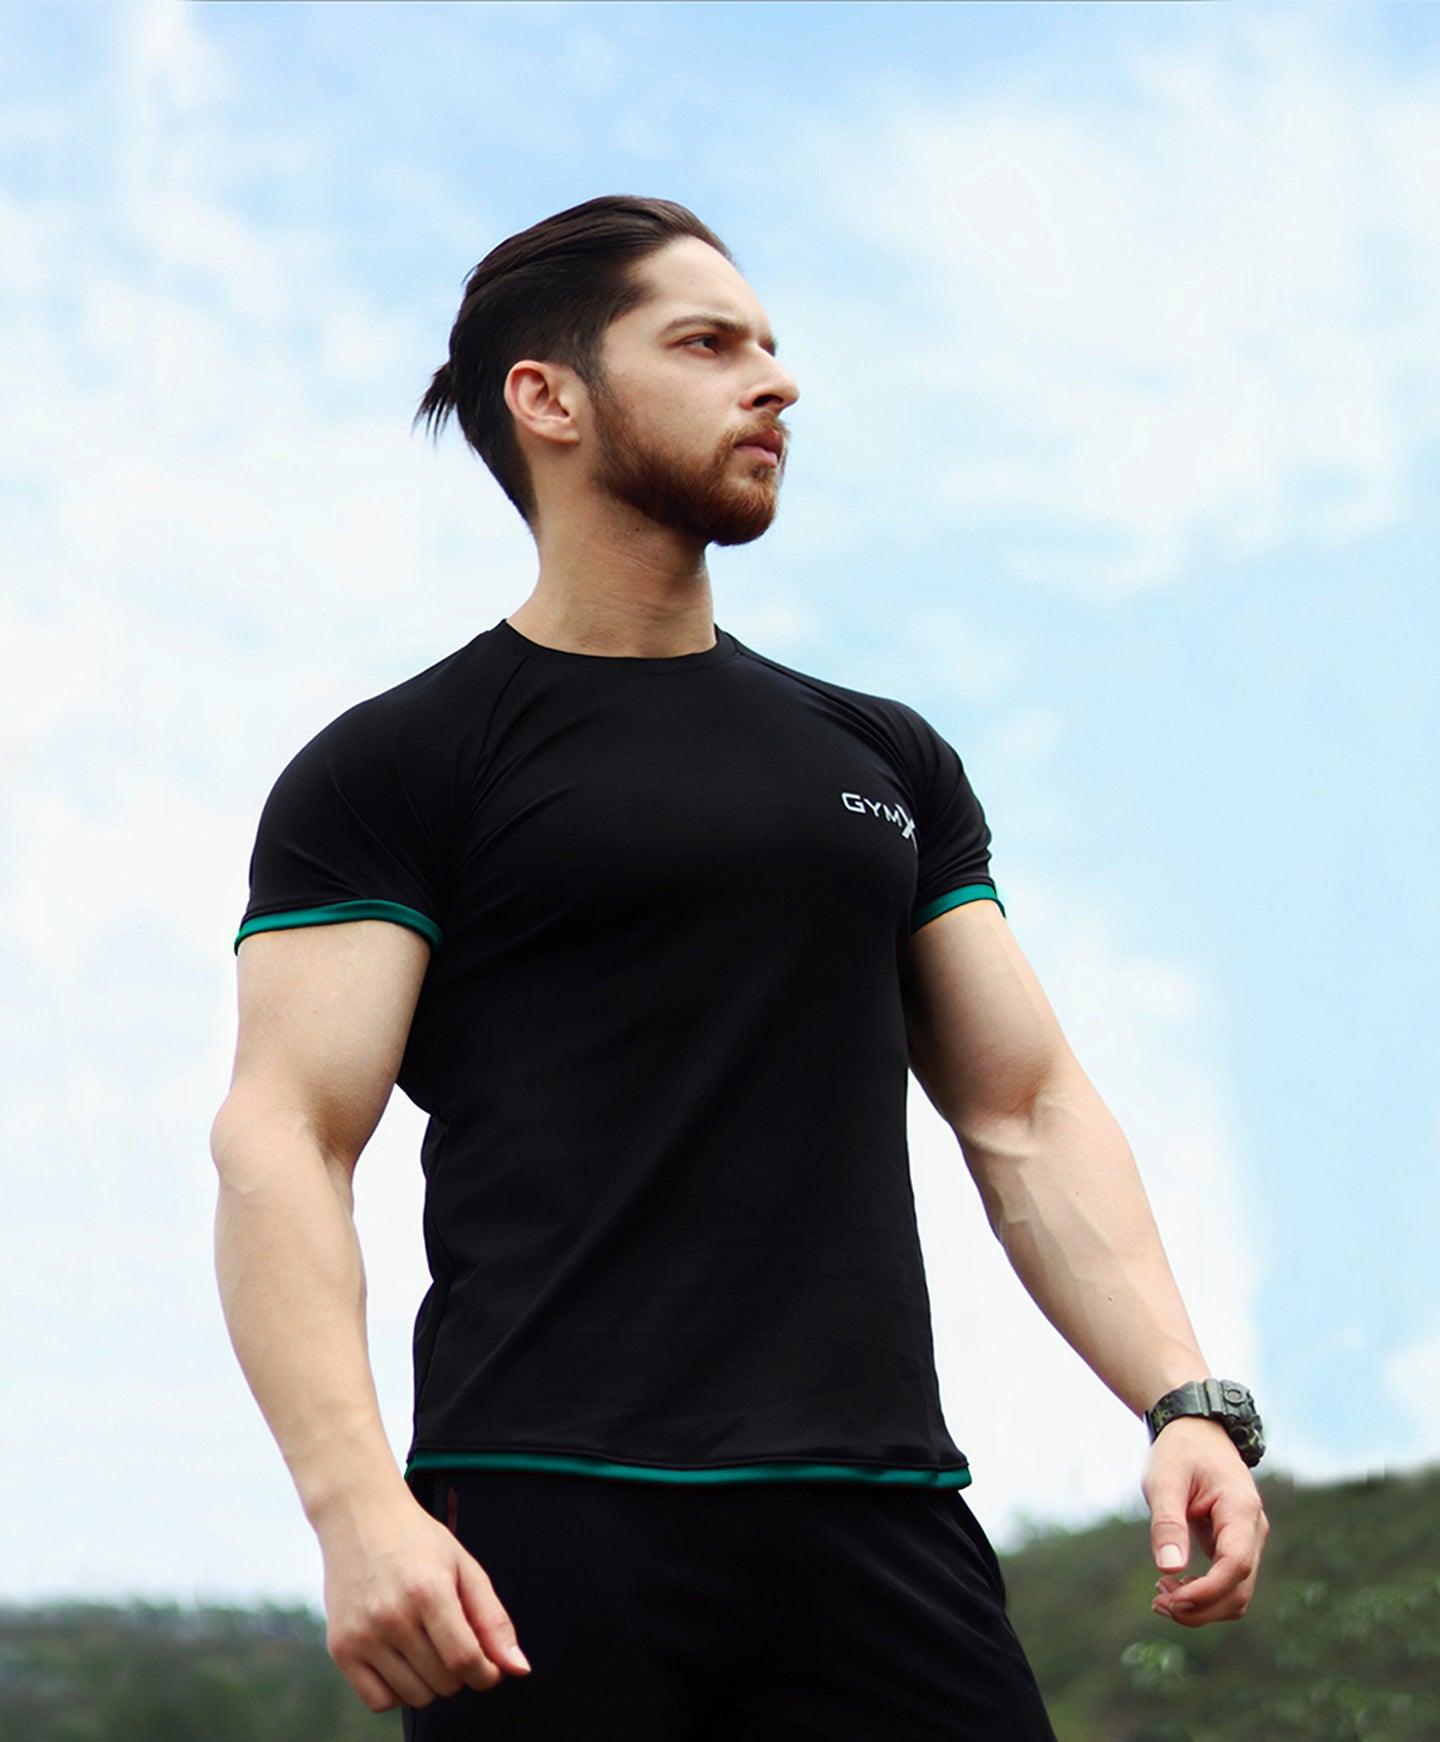 Attitude Emerald Black Muscle Fit Tee - GymX